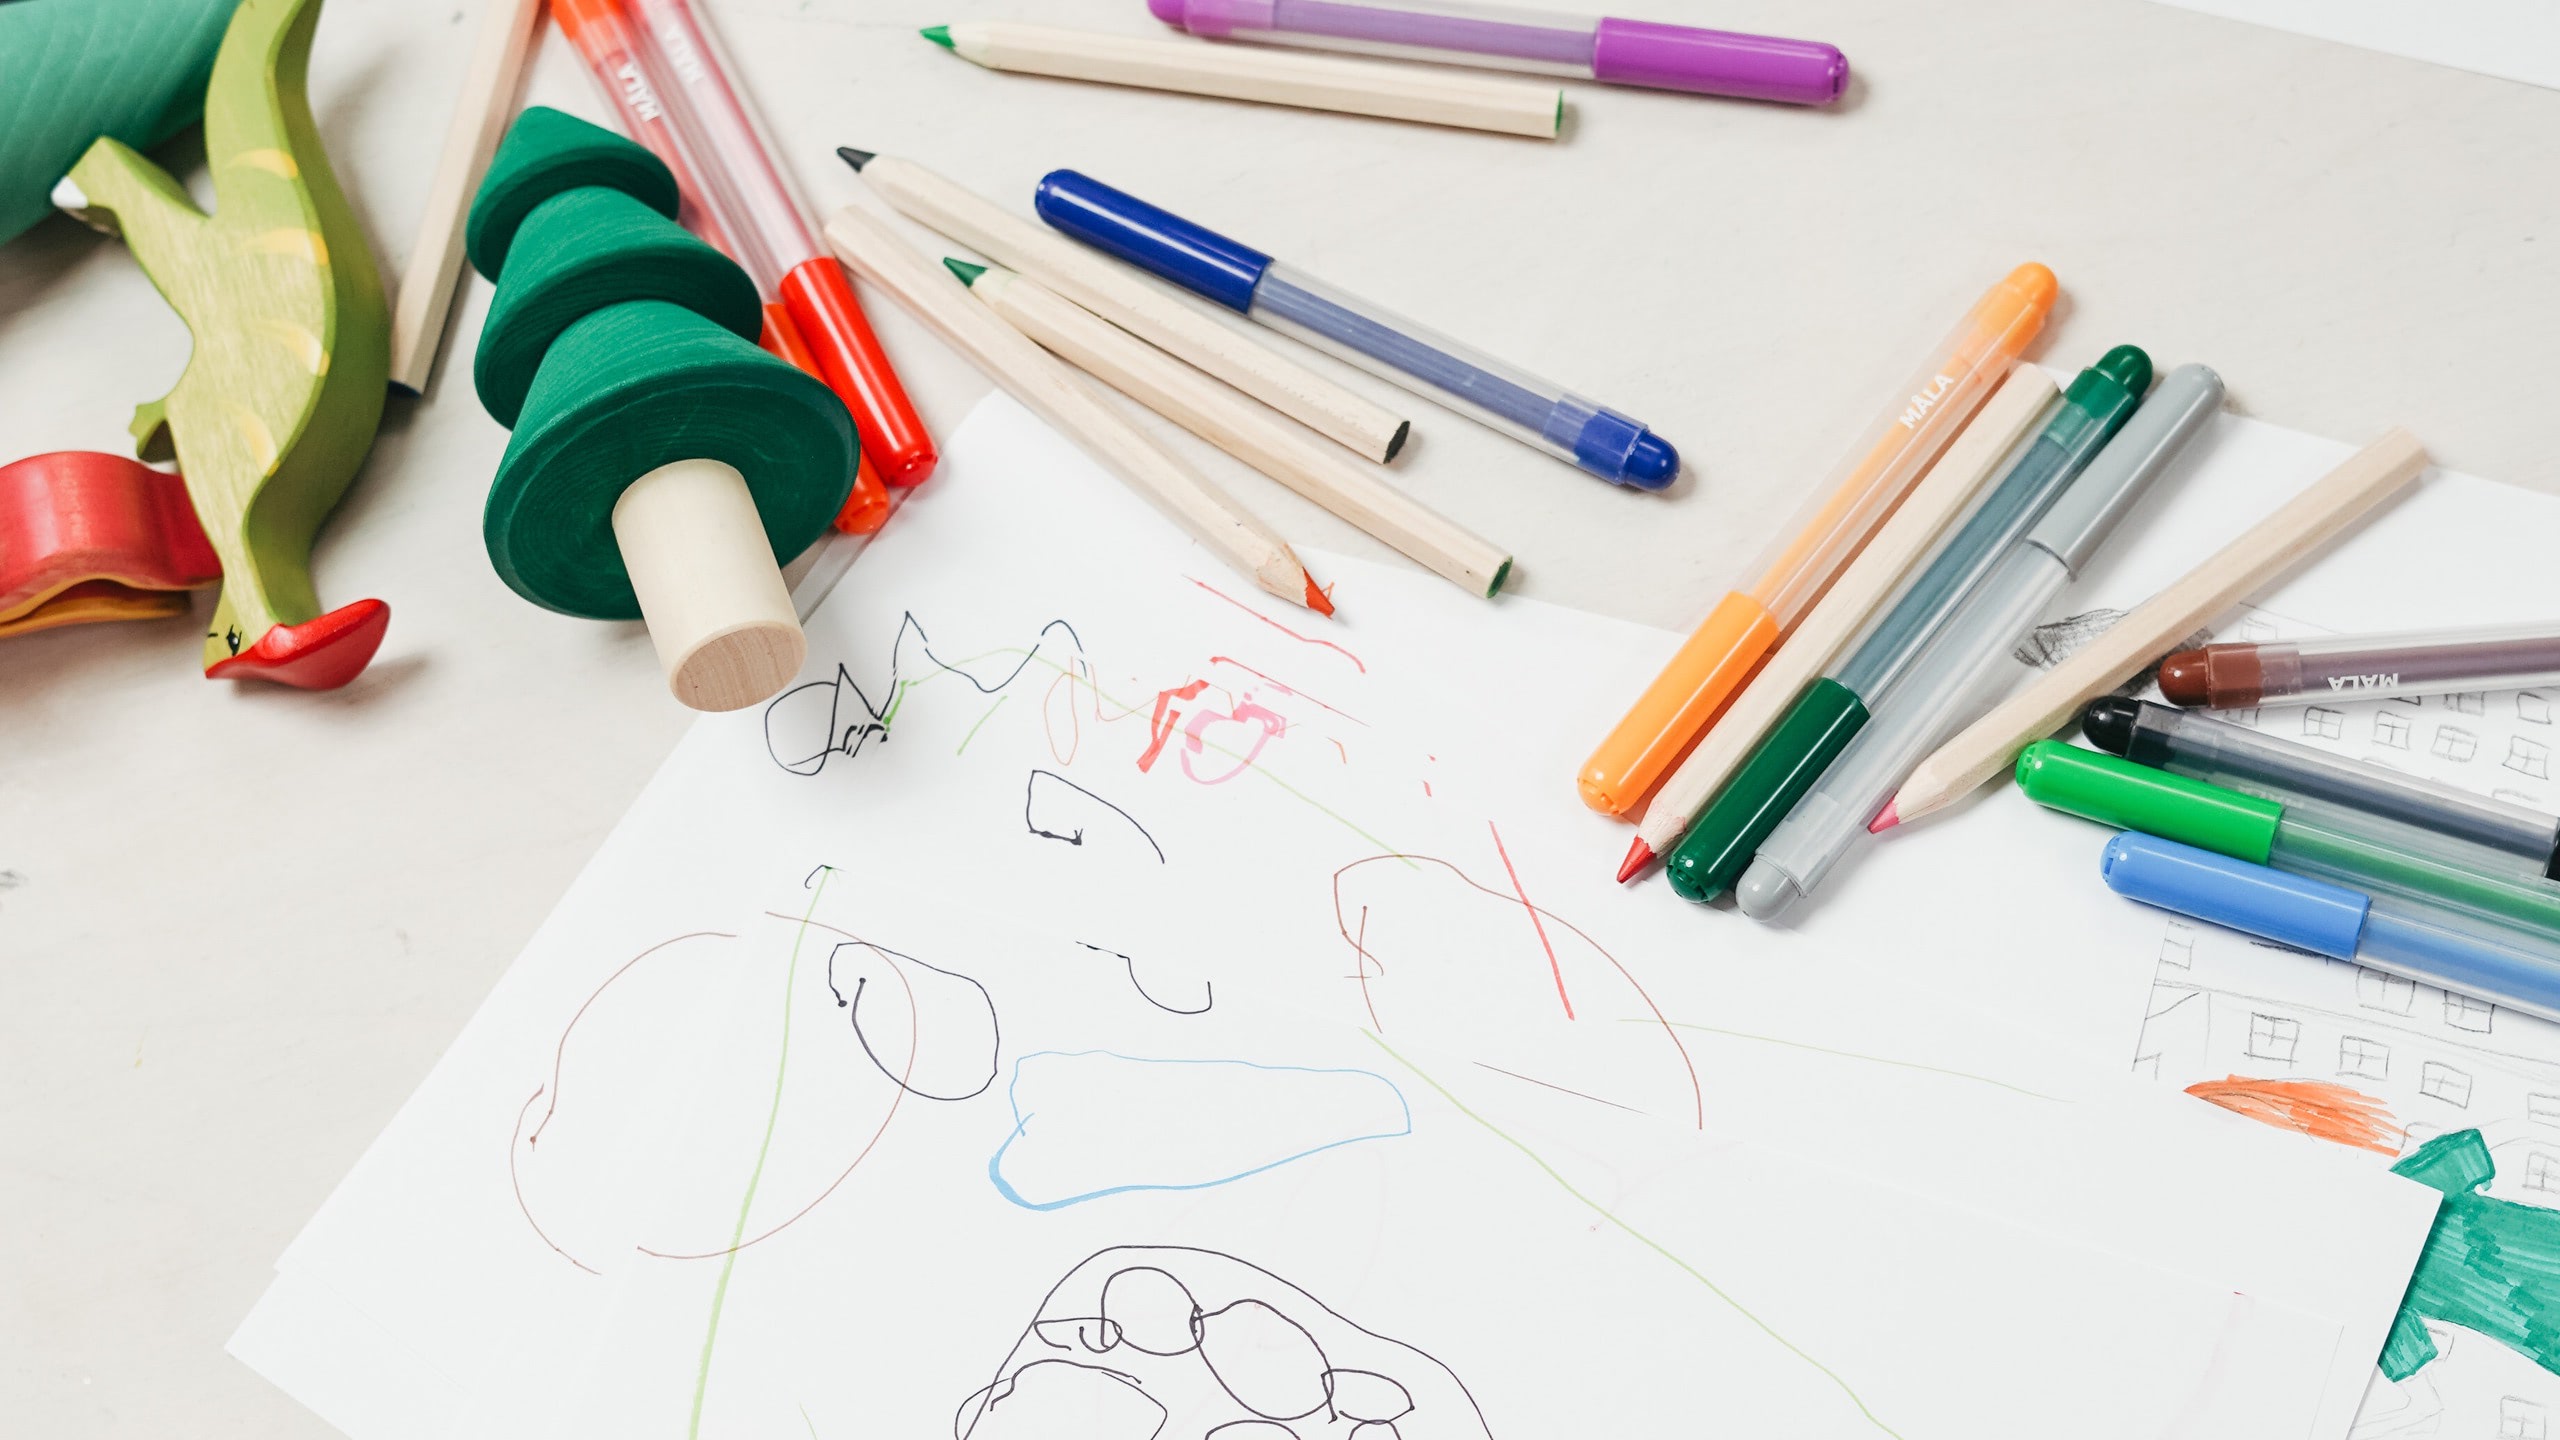 Pens and toys on a table, a child's drawing on paper